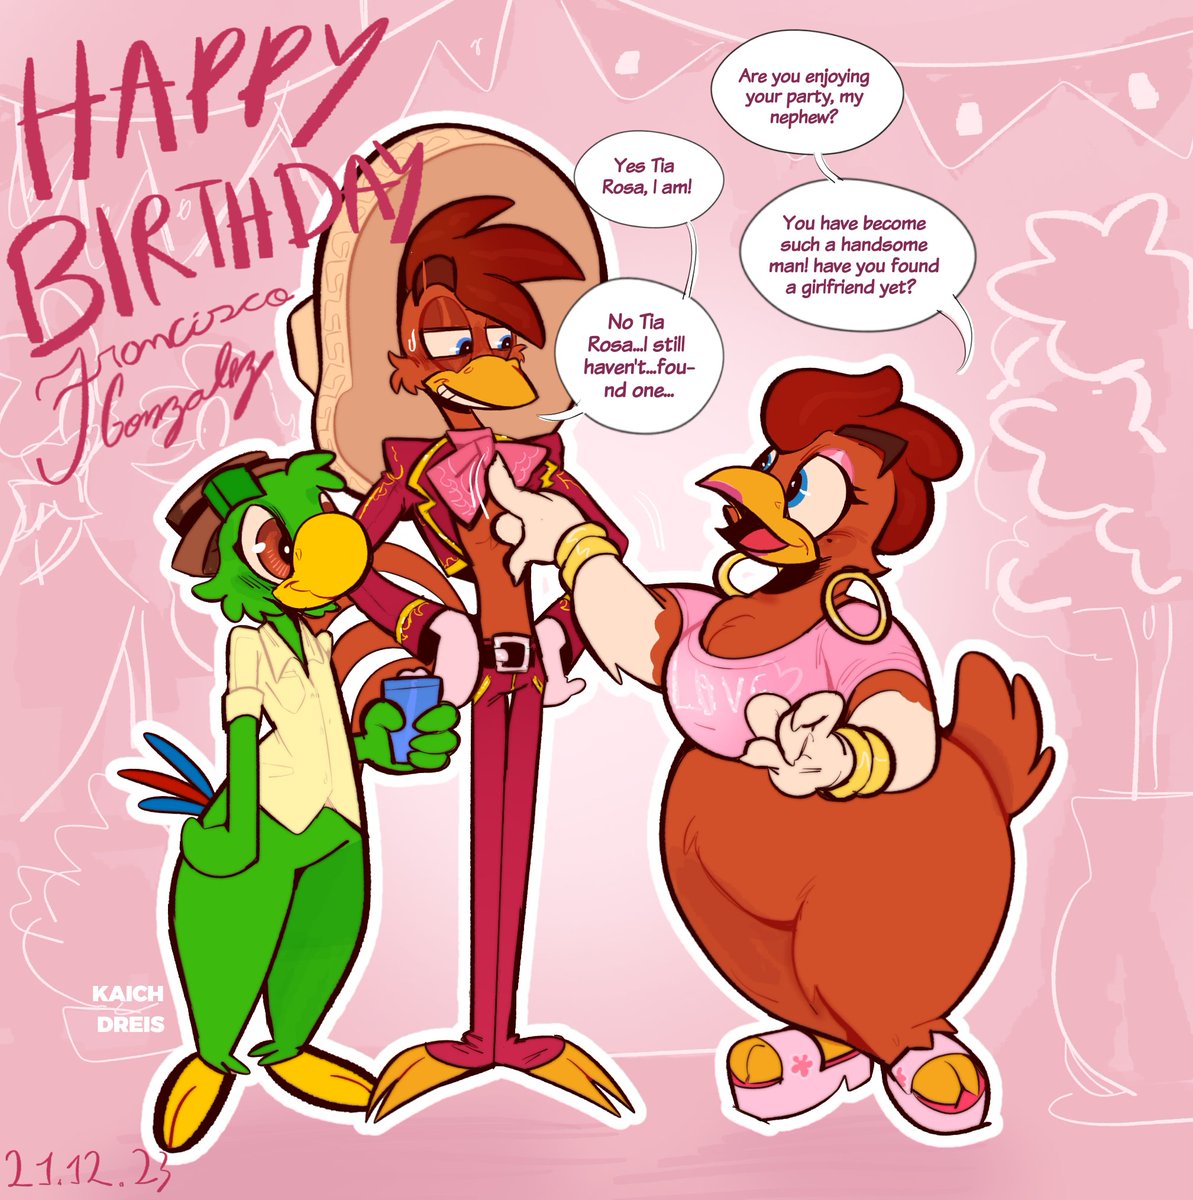 HAPPY BIRTHDAY TO OUR ROOSTER WHO IS STILL IN THE CLOSET 🎉🎉🎉
#panchitopistoles #panjosé  #thethreecaballeros #josécarioca